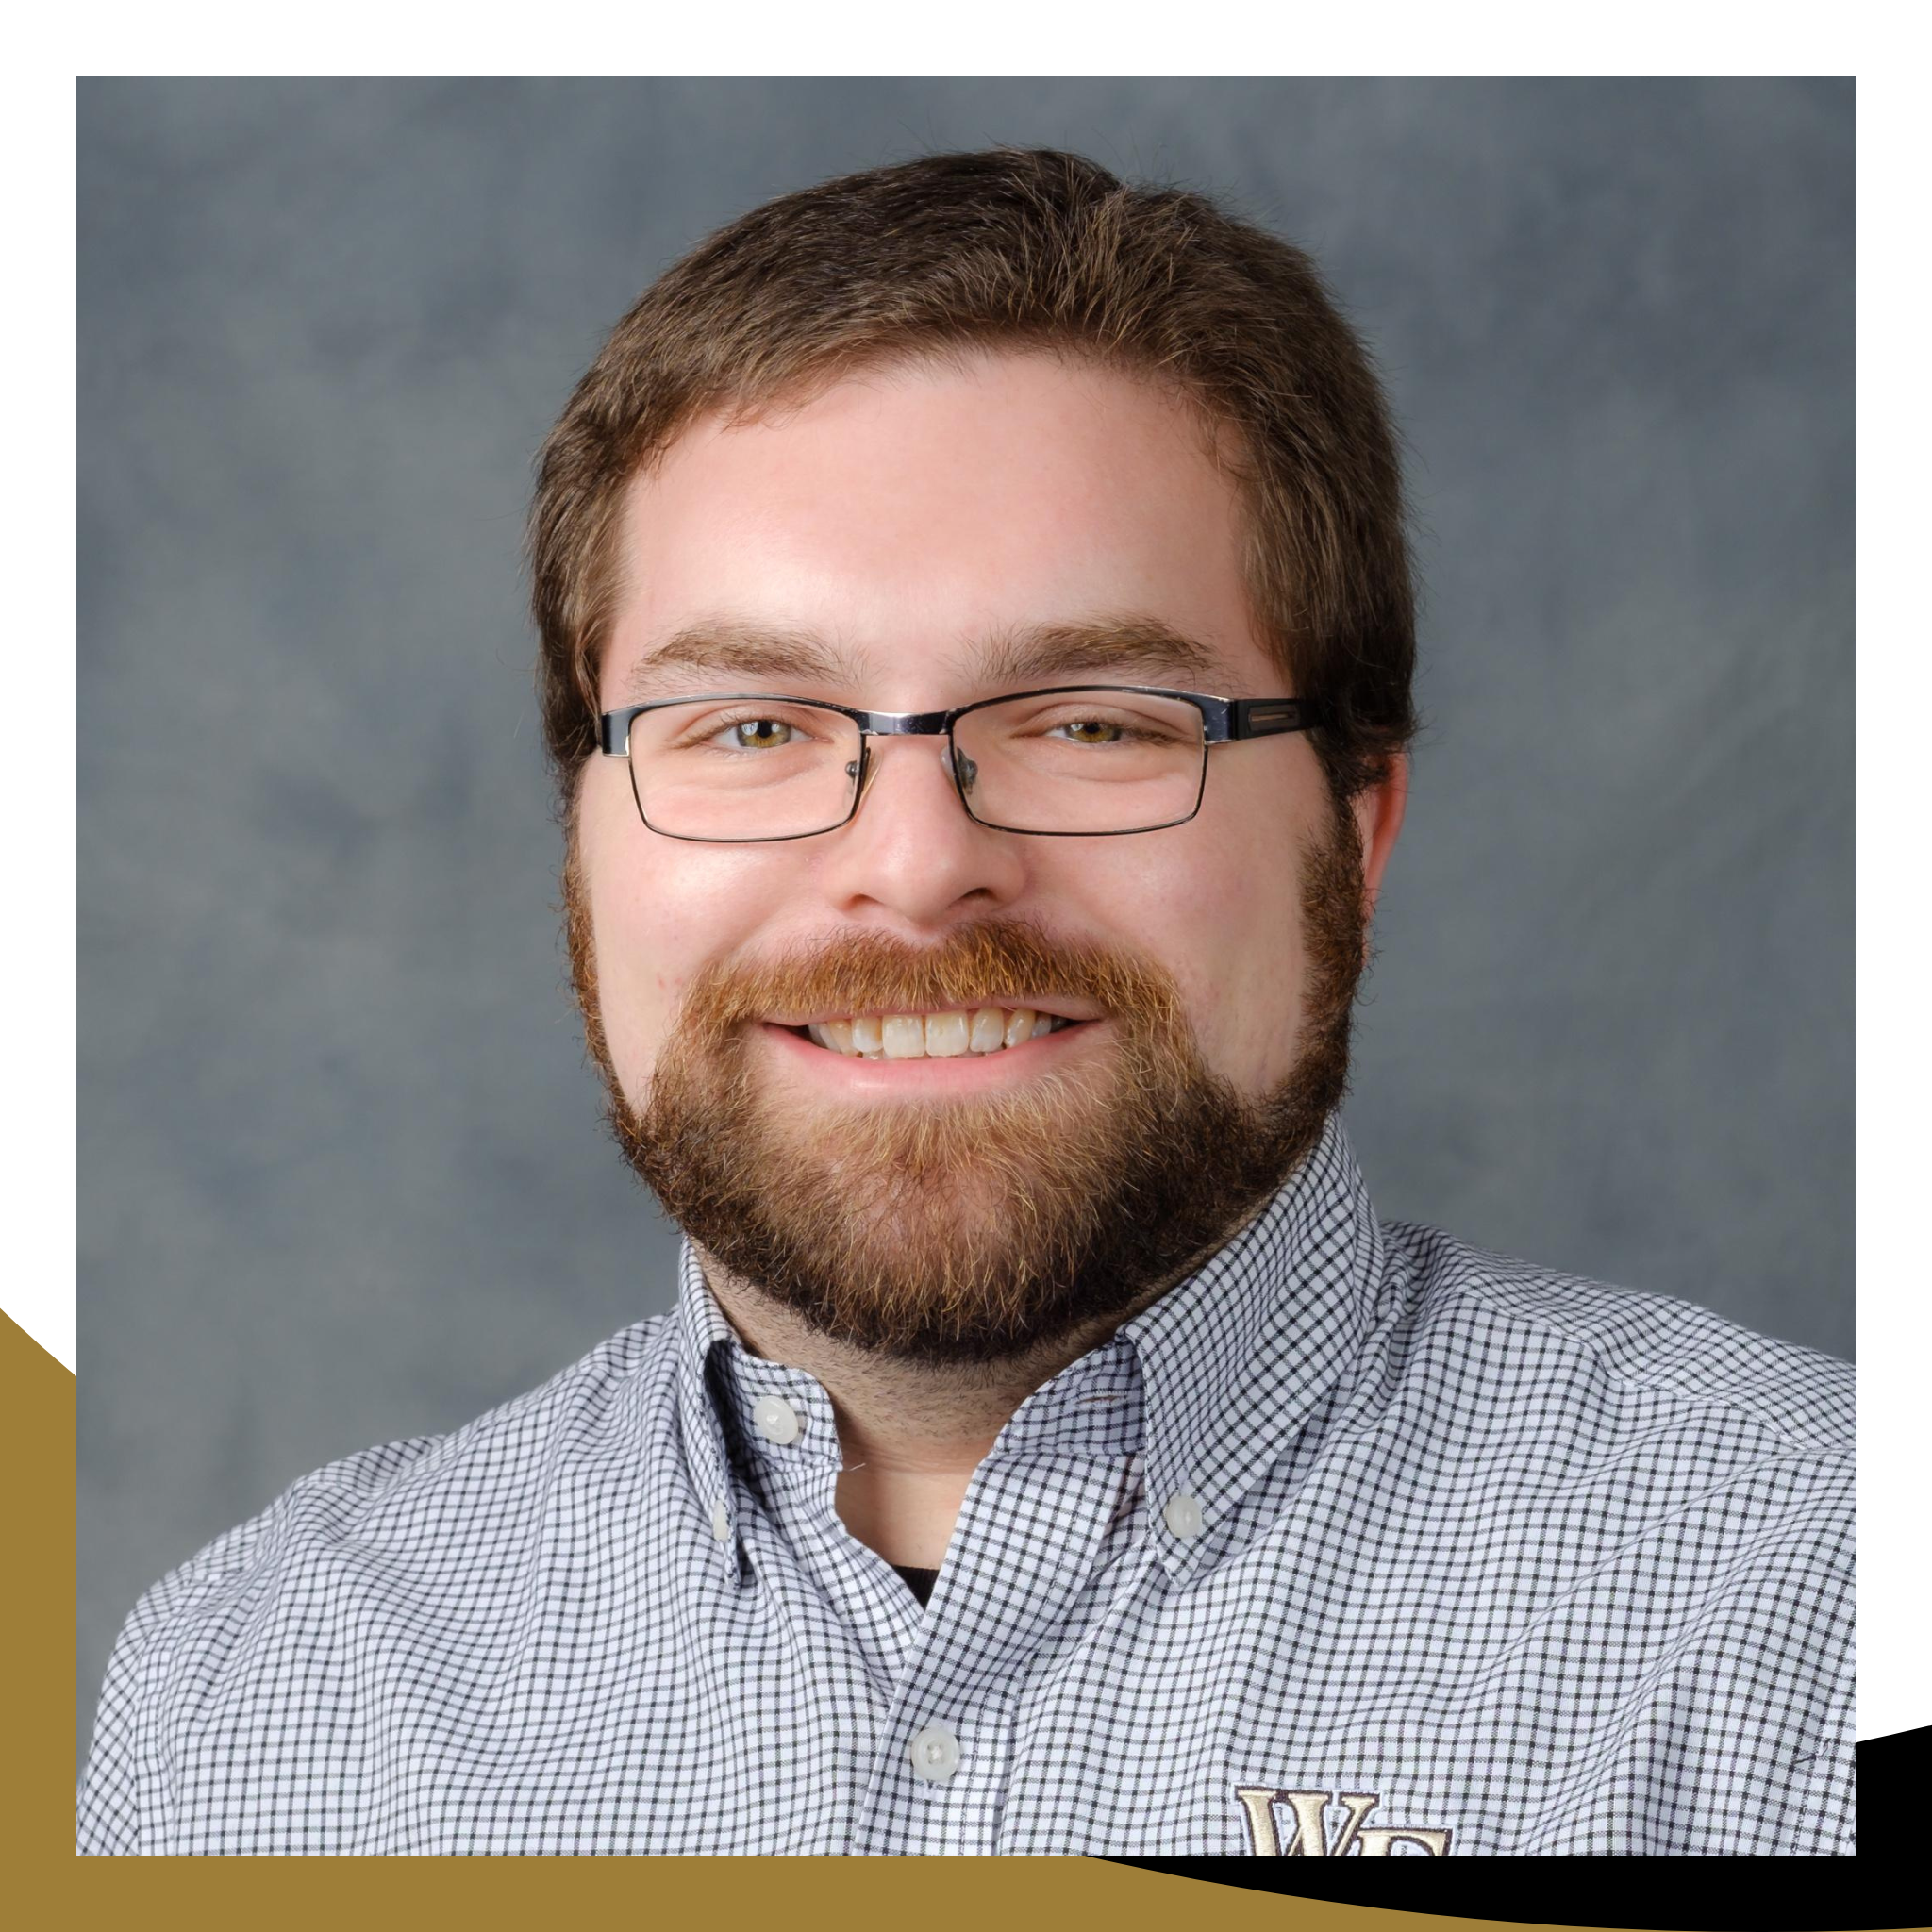 Photo of Trey Frye, who has a mustache and beard, and is wearing glasses and a gray shirt with a Wake Forest logo